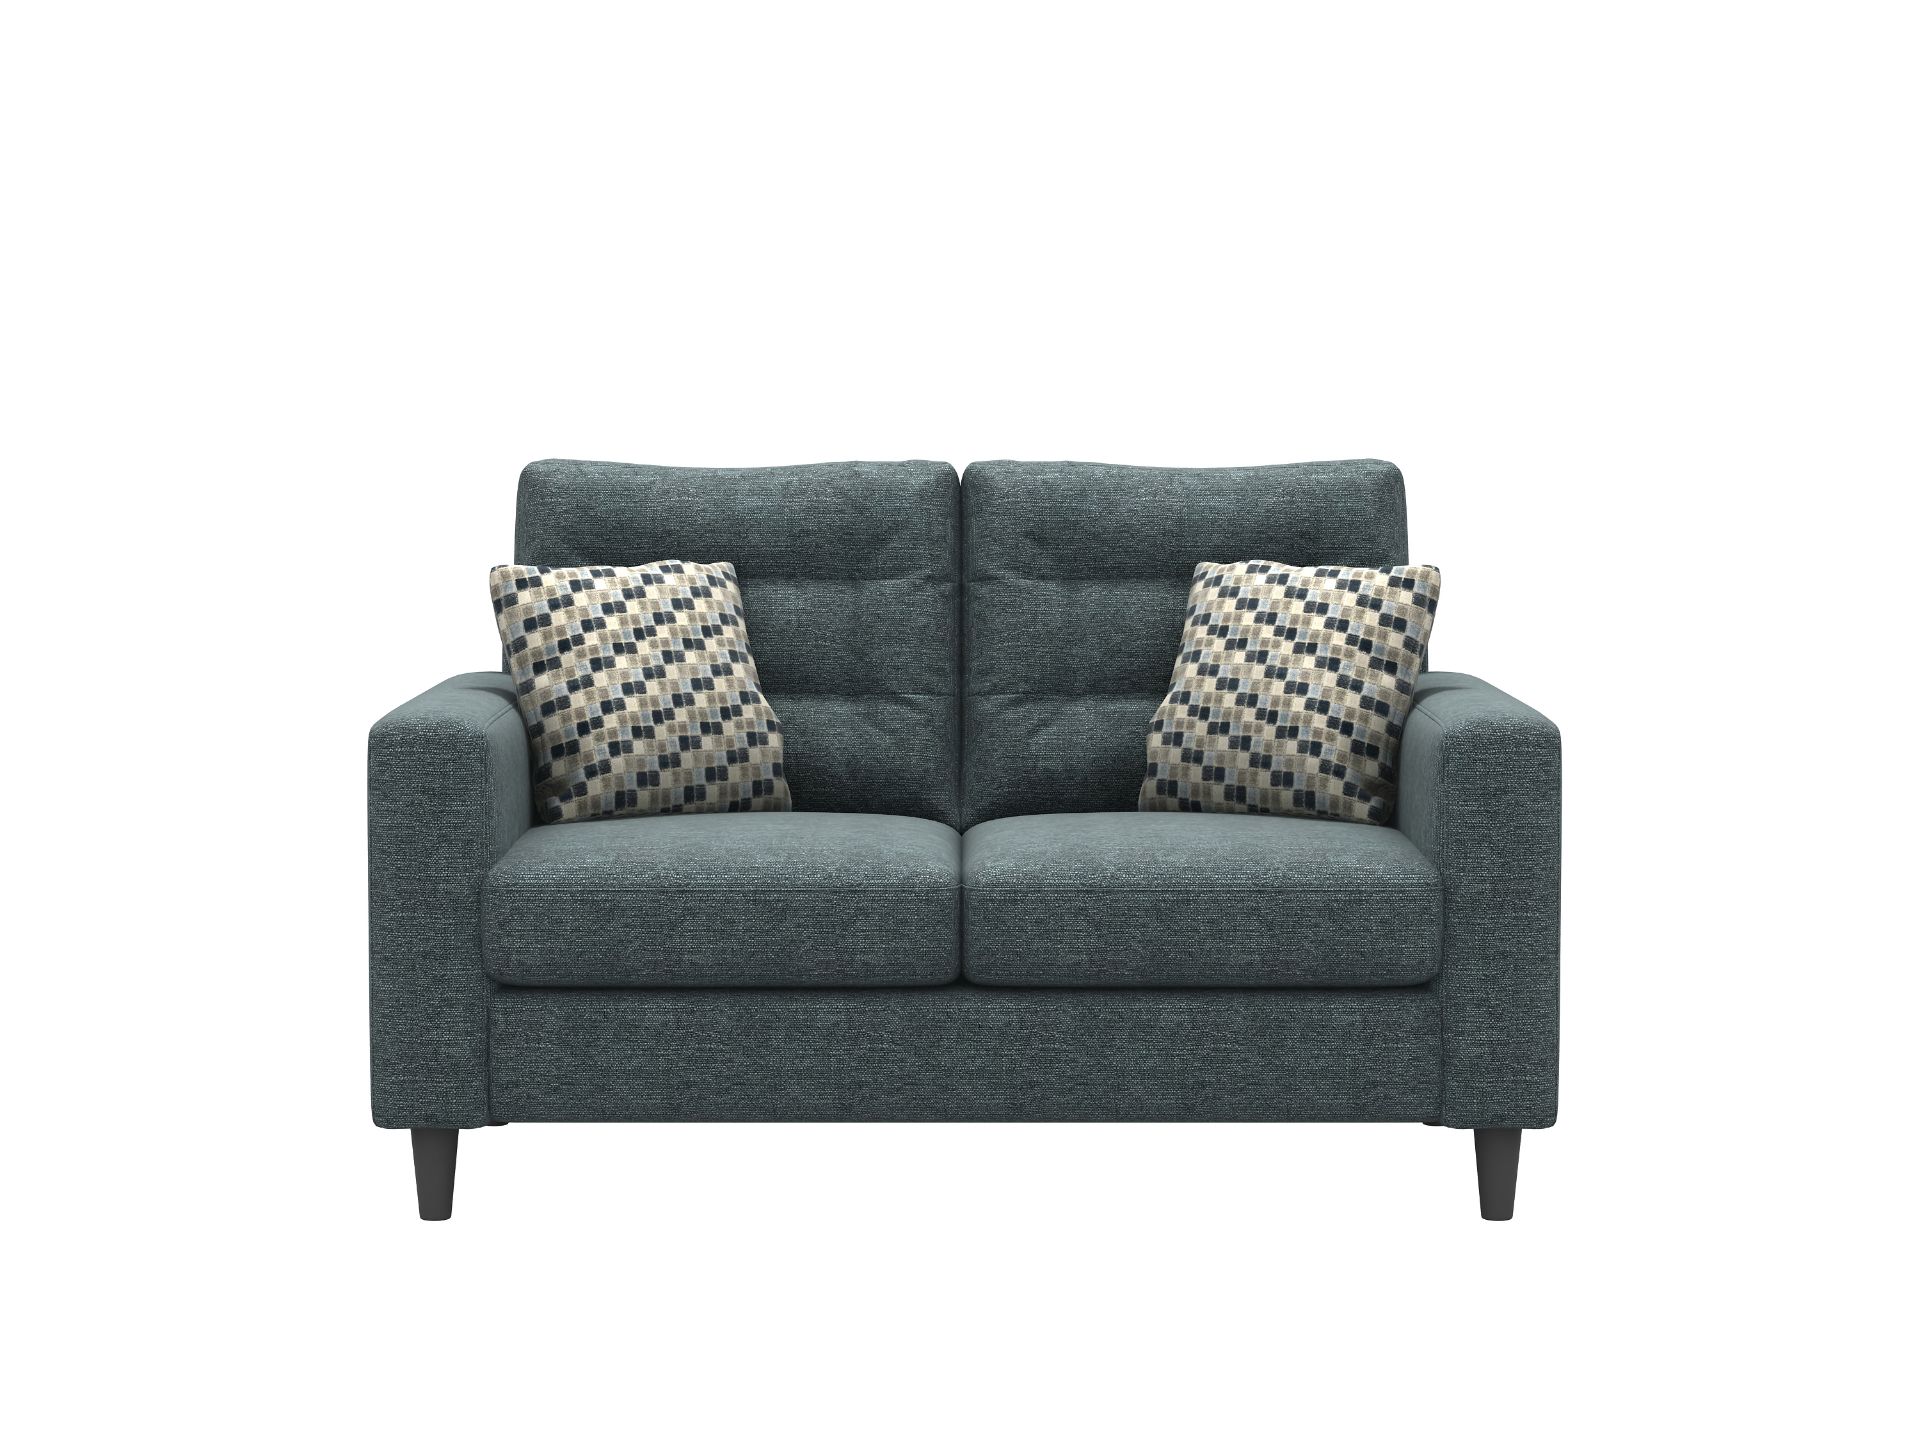 1x Cavendish Upholstery 2 Seater Icon Sofa, Handmade in the UK - Aosta Deep Blue - RRP £1799 - New